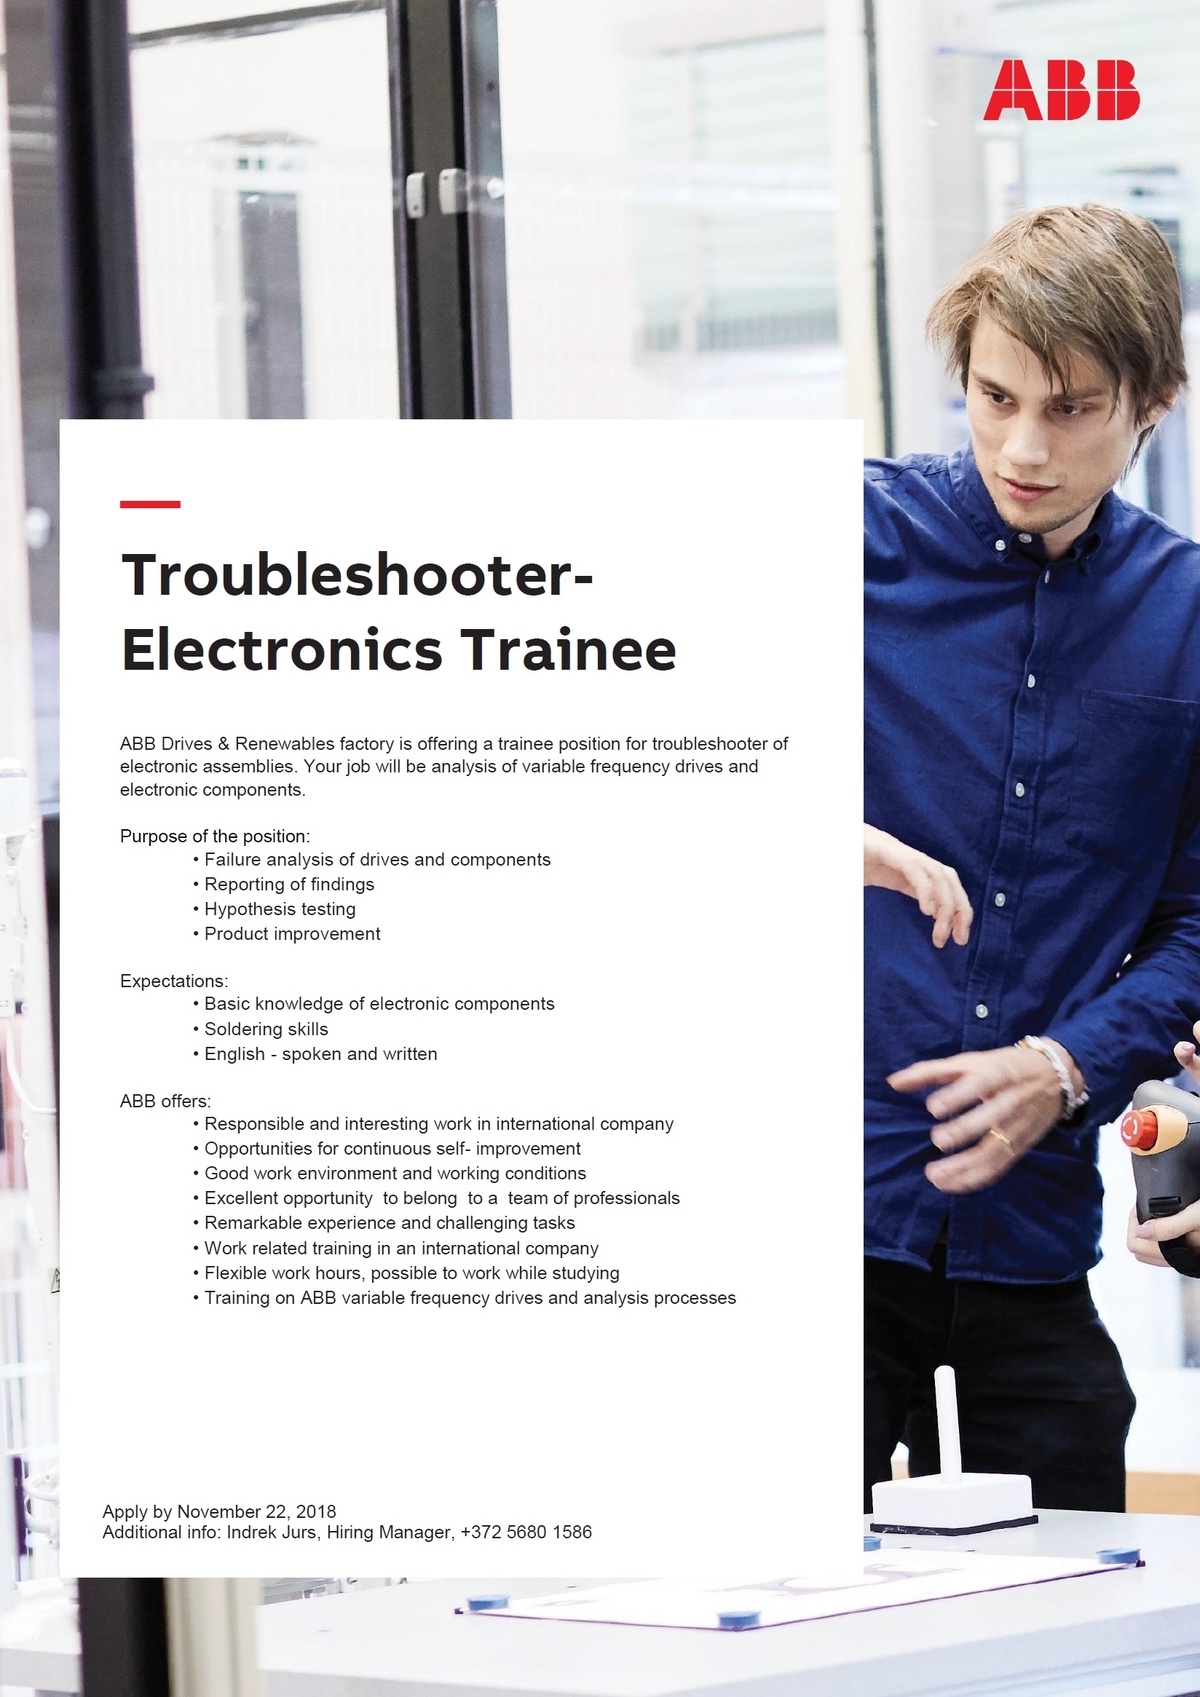 ABB AS Troubleshooter-Electronics Trainee